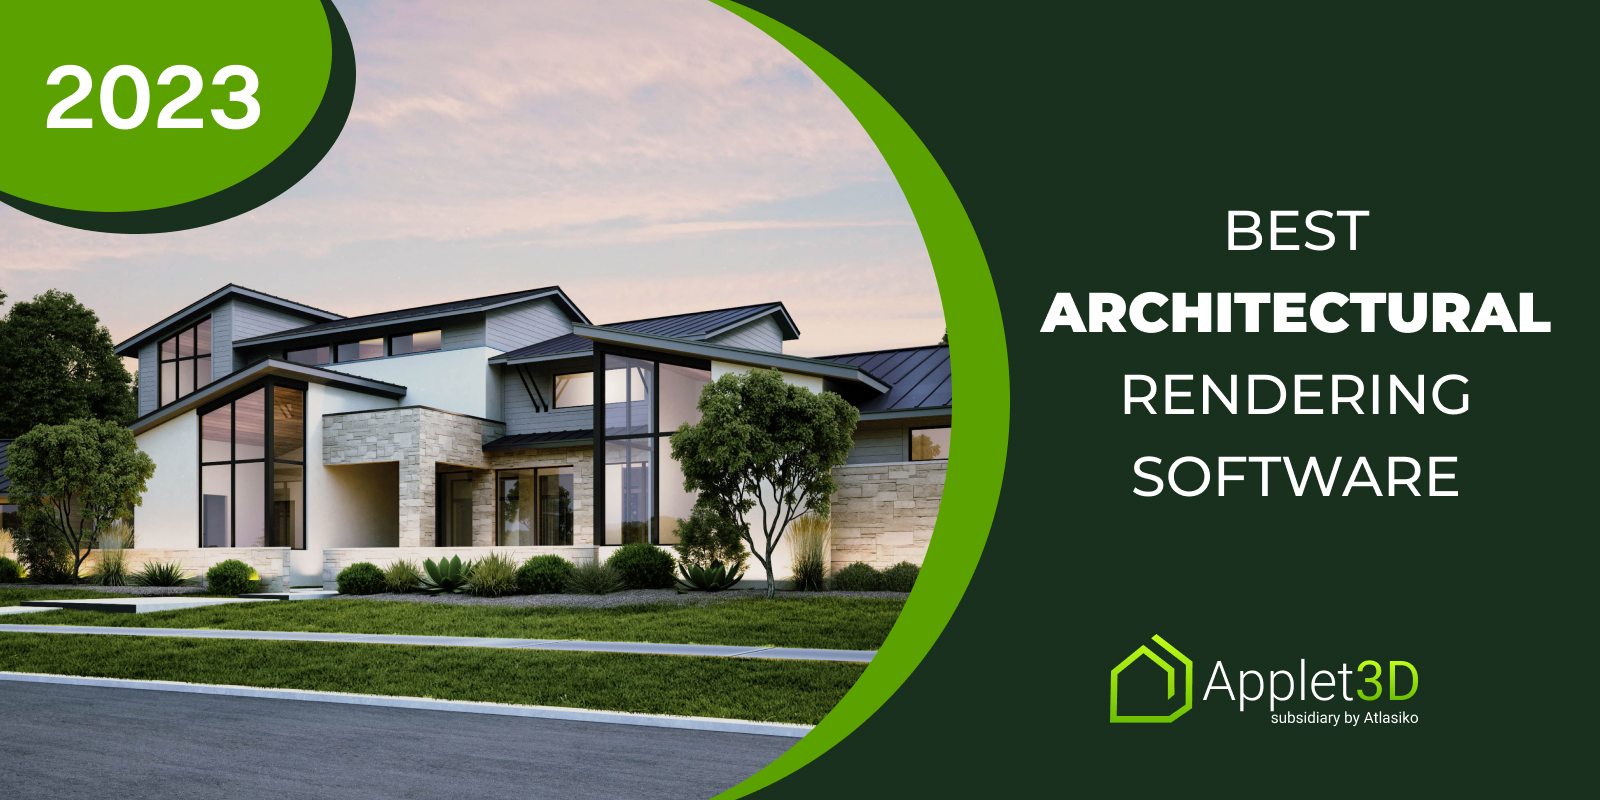 15 Best architectural rendering software in 2023 for Windows, macOS, free  and paid versions - Applet3D